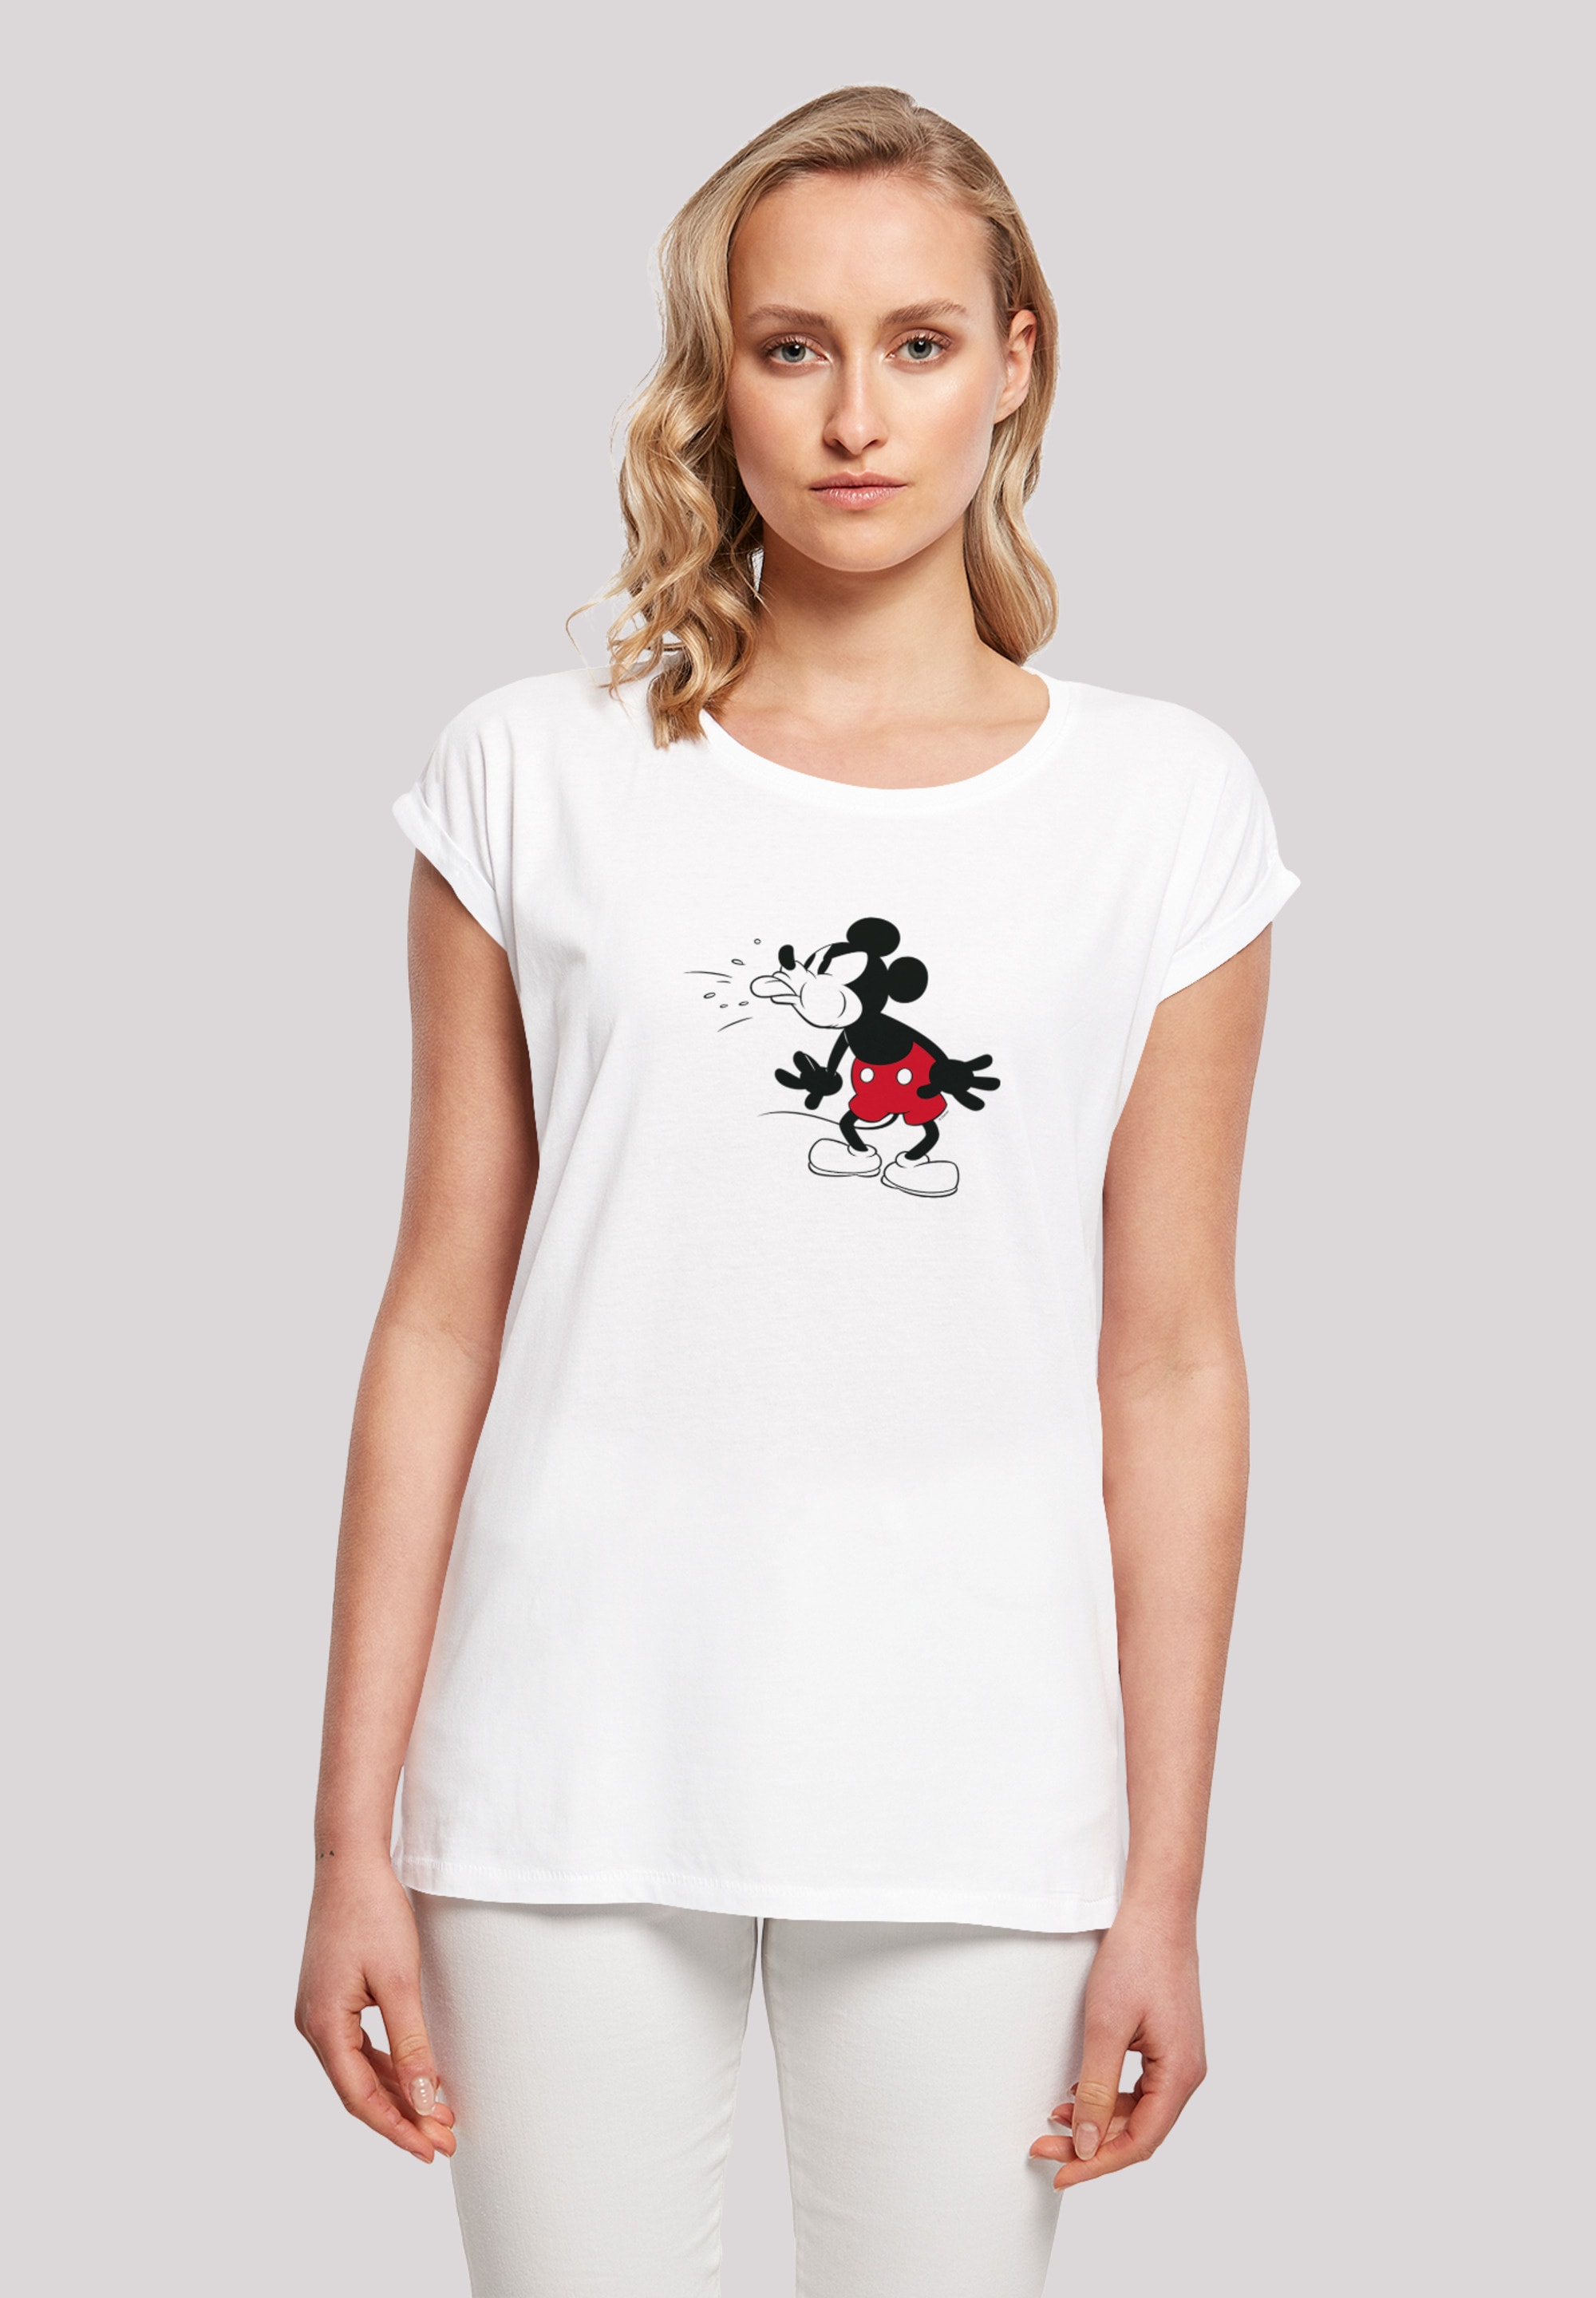 Mickey Micky Mouse F4NT4STIC Vintage »Disney Classic kaufen T-Shirt Maus«, Print